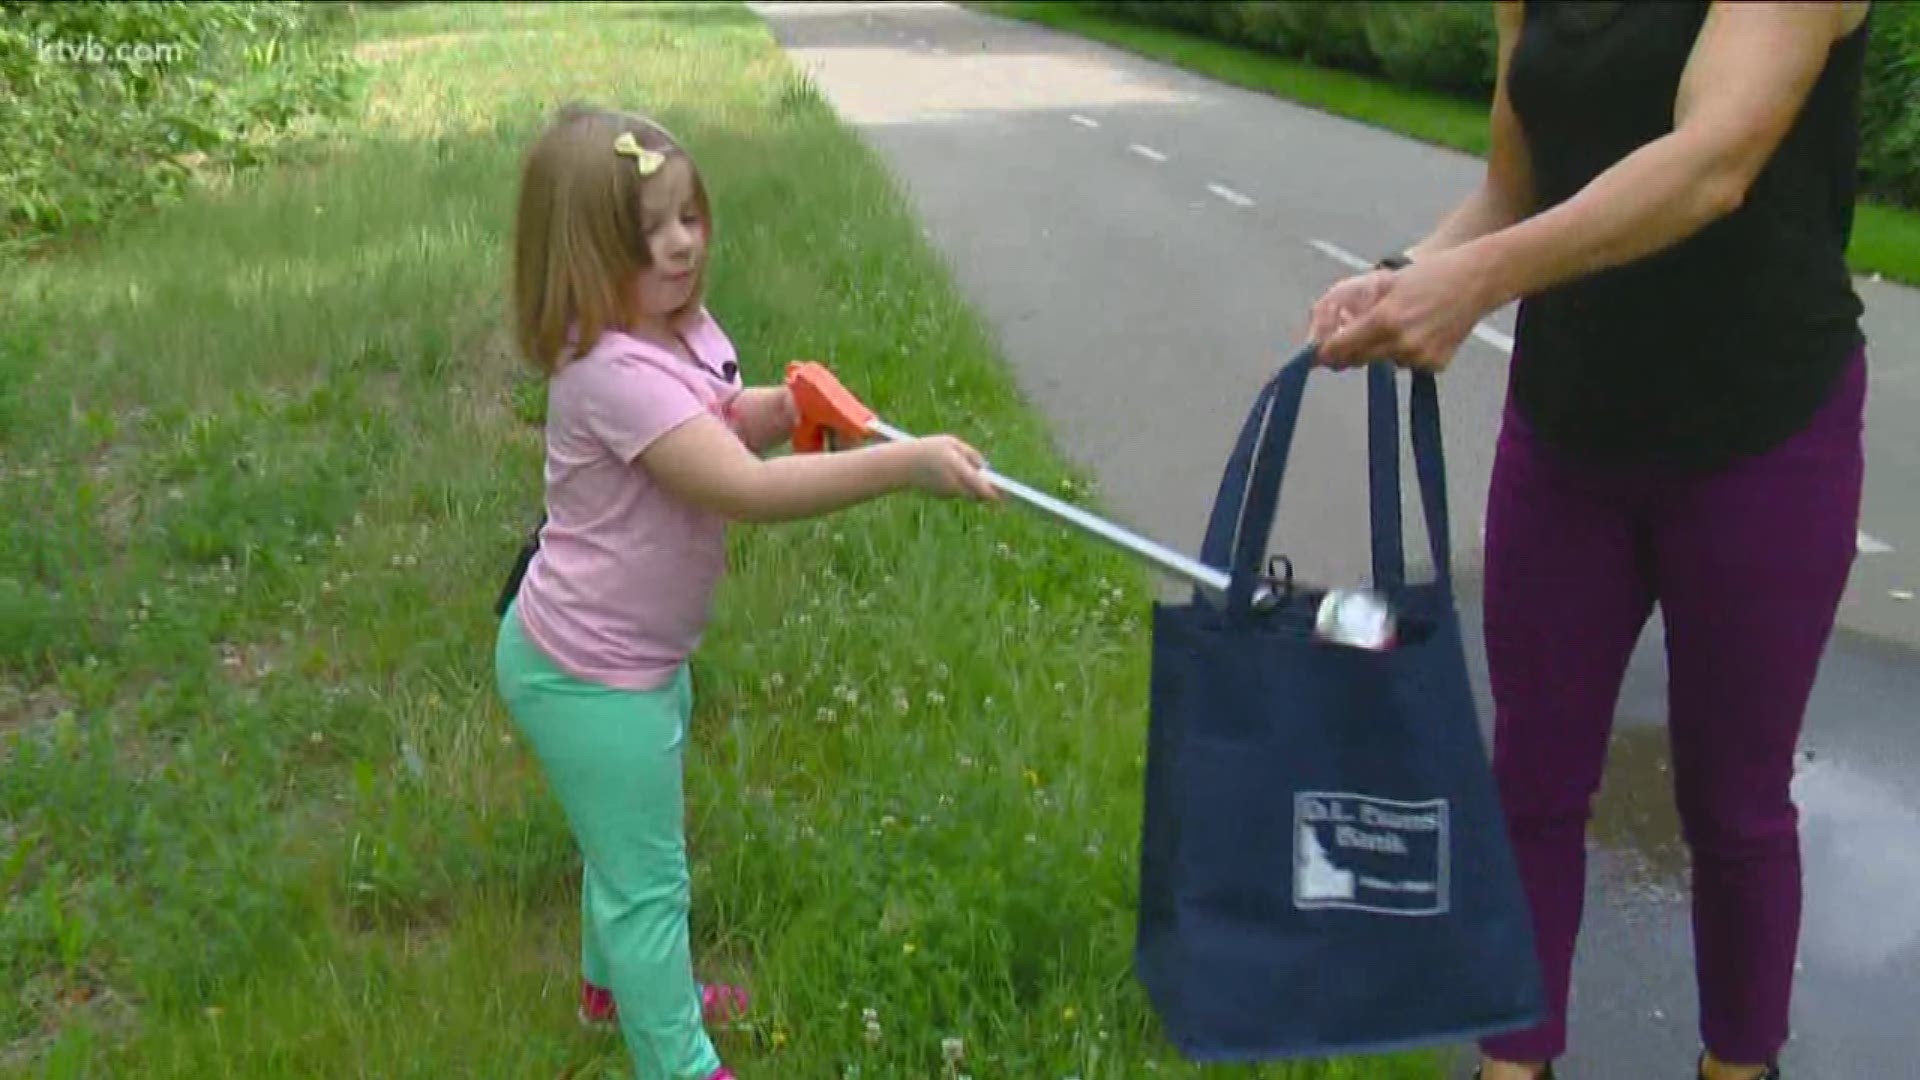 She's only 5 years old, but London Winner is already doing her part to beautify the Boise River Greenbelt.